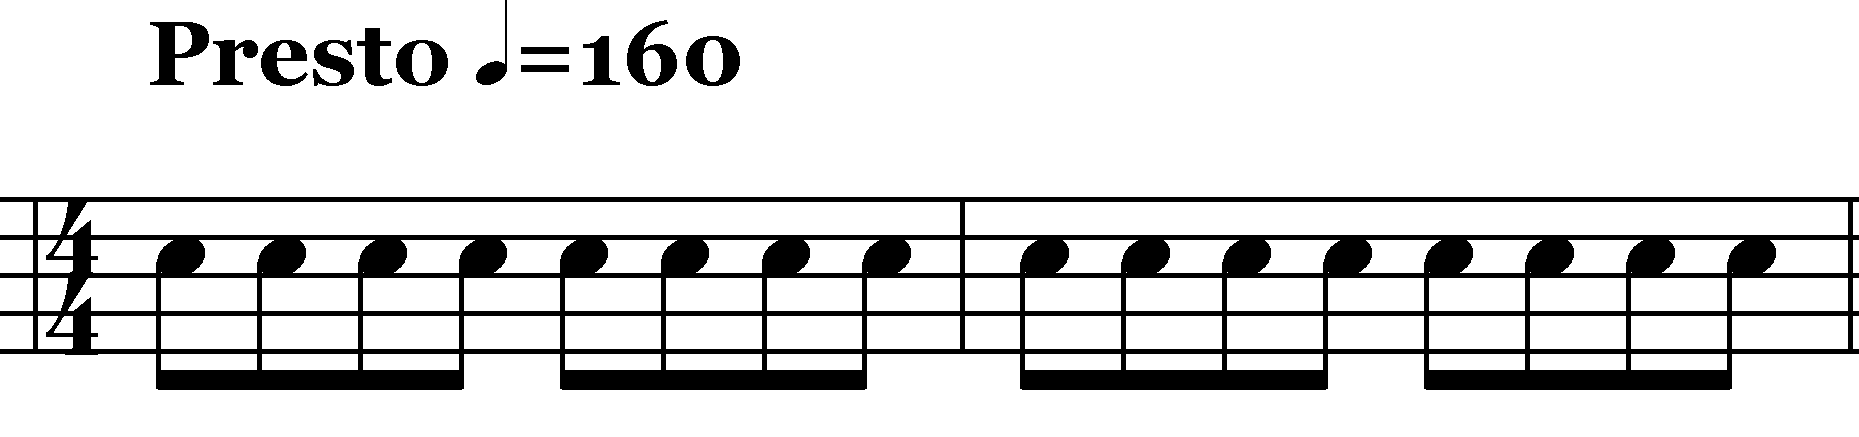 Musical Note - Eighth Note and Tempo - Presto 160